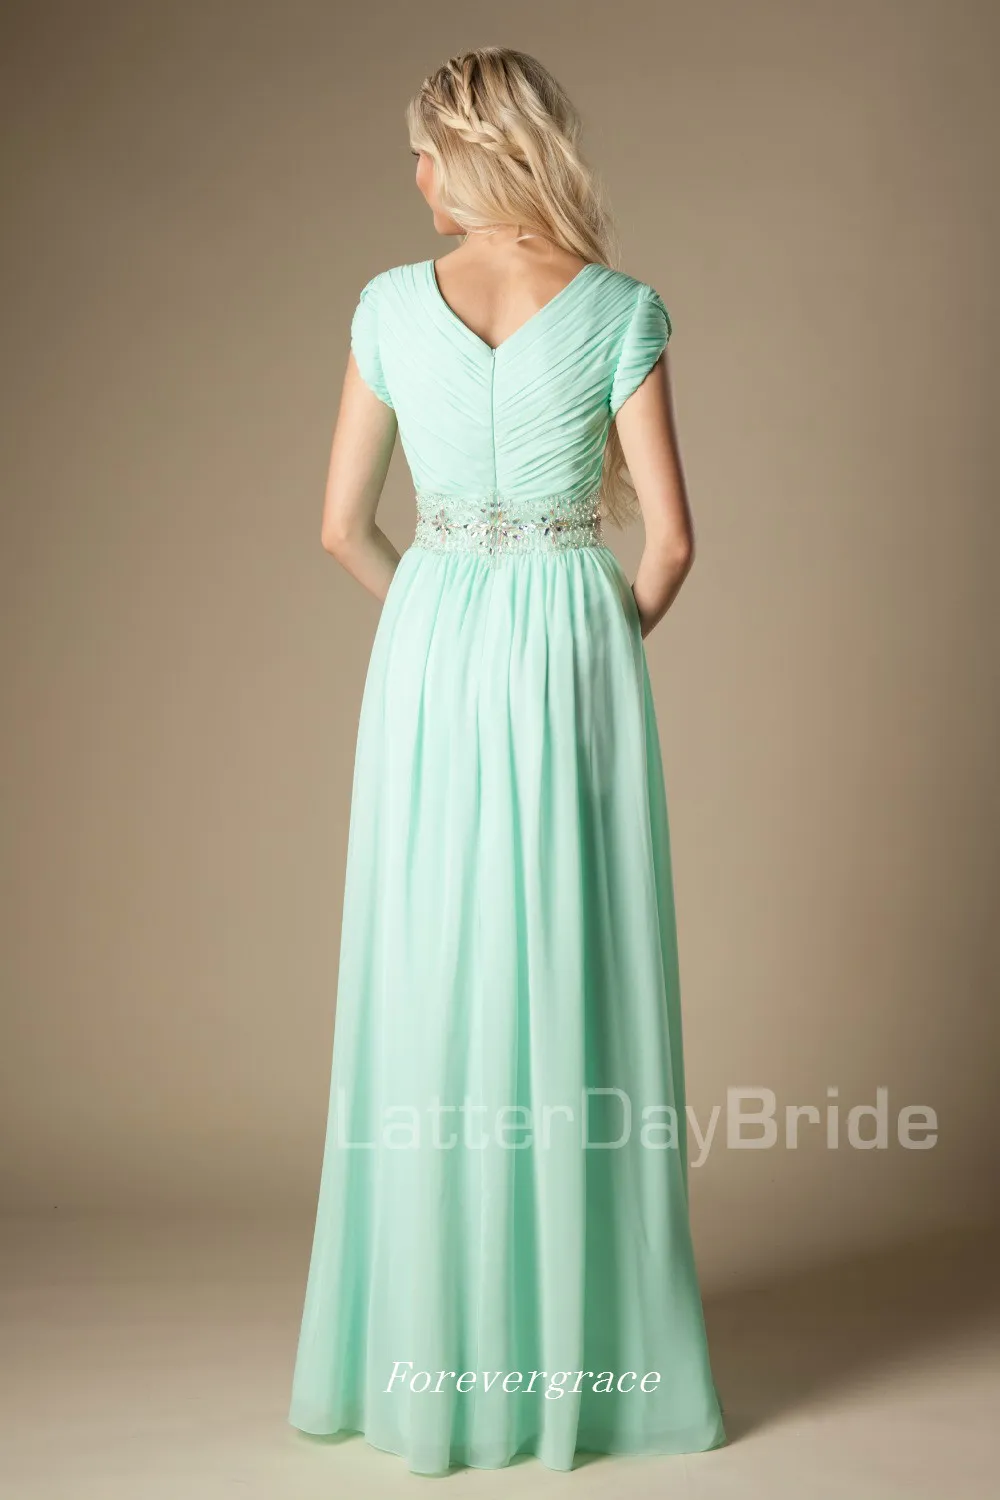 High Quality Beaded Mint Green Bridesmaid Dress Modest A-Line Chiffon Formal Maid of Honor Dress Wedding Guest Gown Custom Made Plus Size